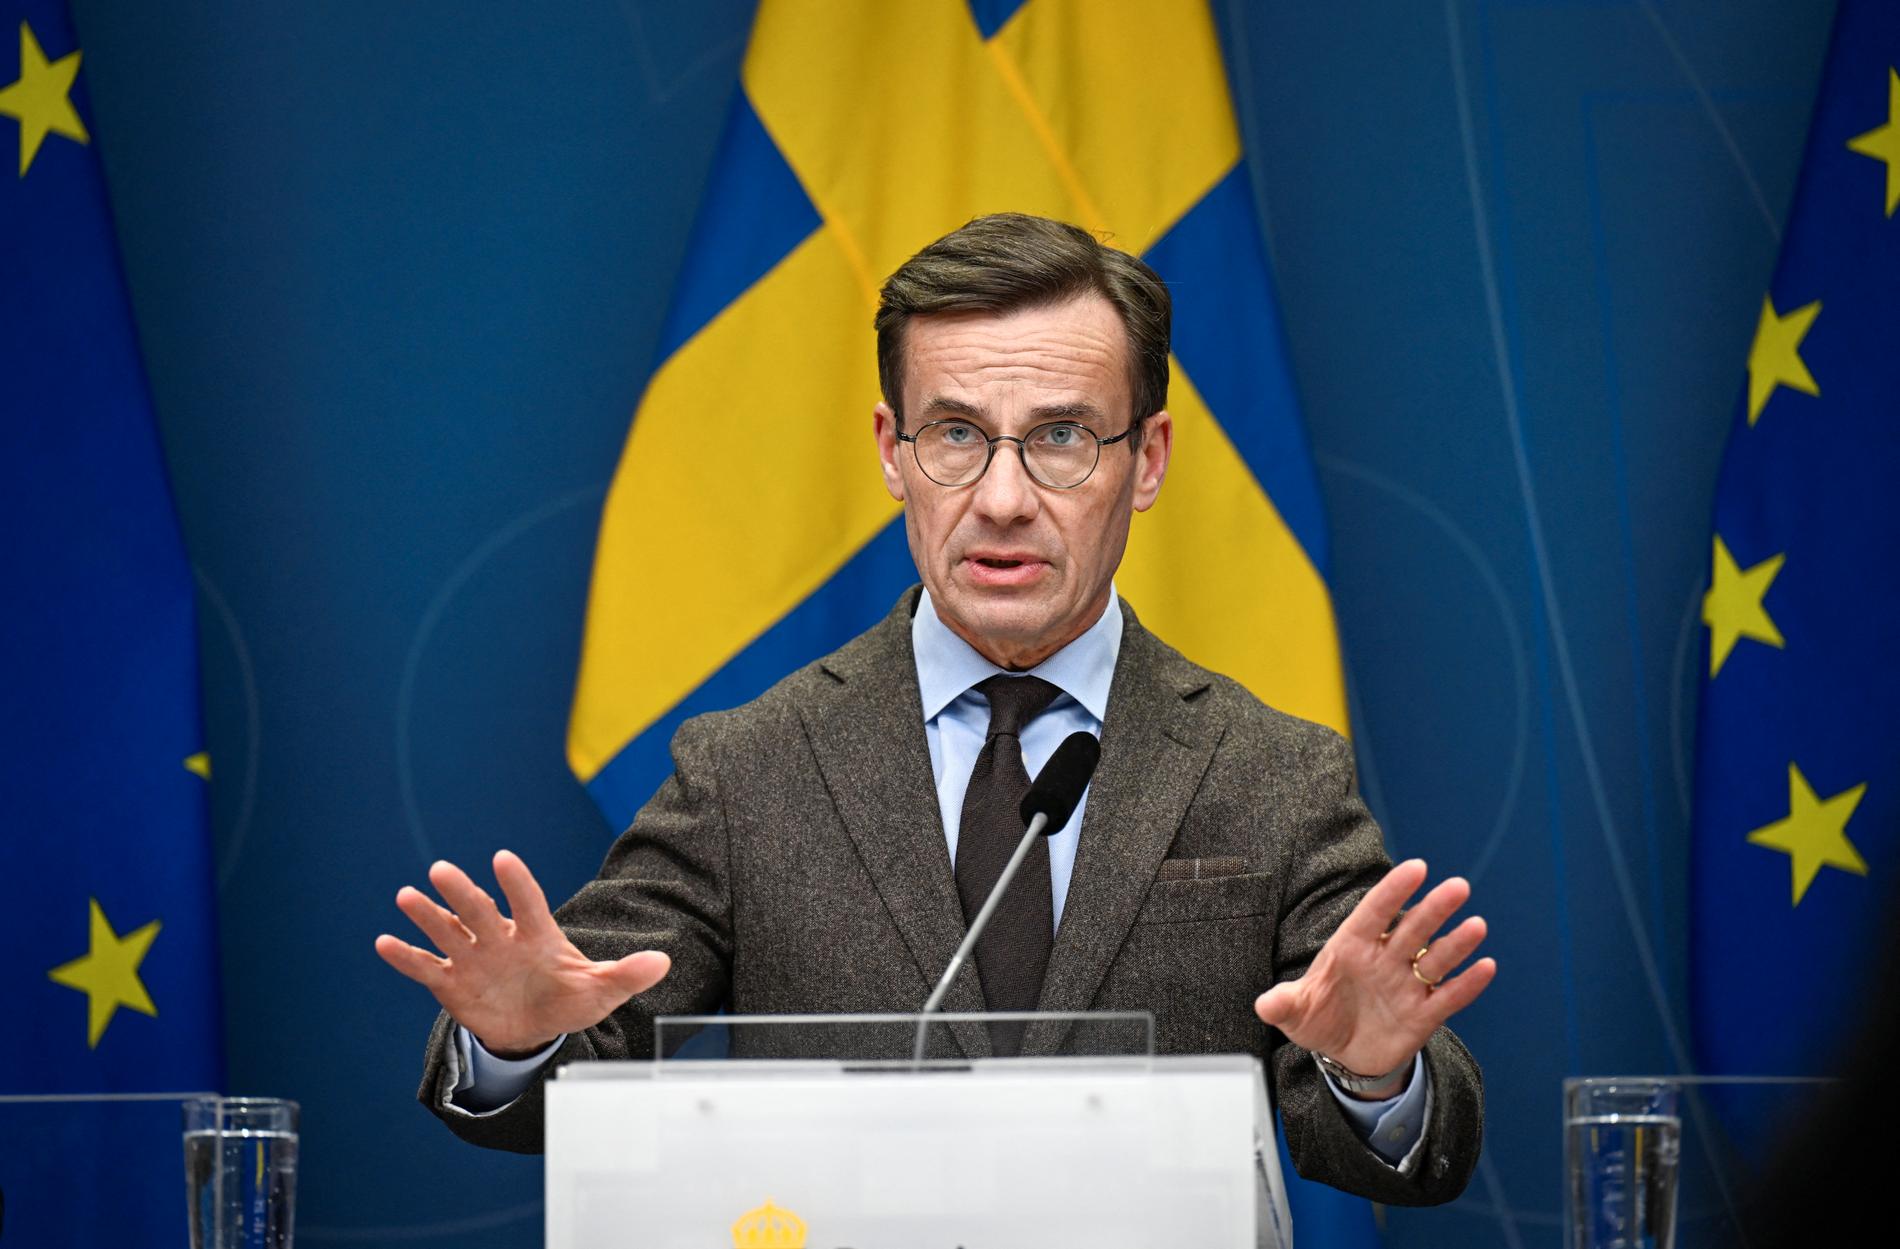 Prime Minister of Sweden on the situation in NATO: – This is serious